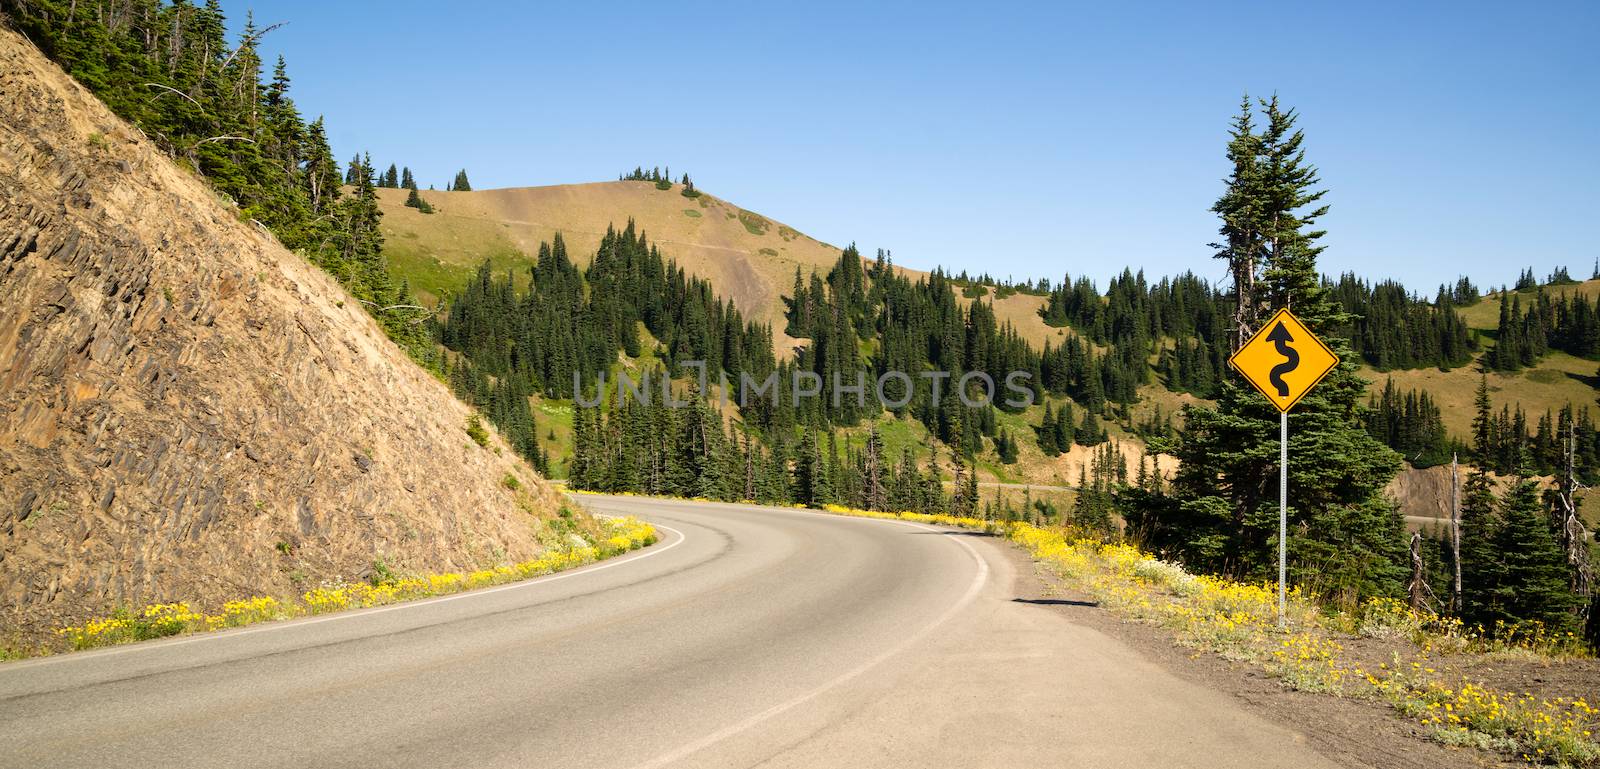 Road Sign Indicates Curves Ahead Mountain Landscape by ChrisBoswell